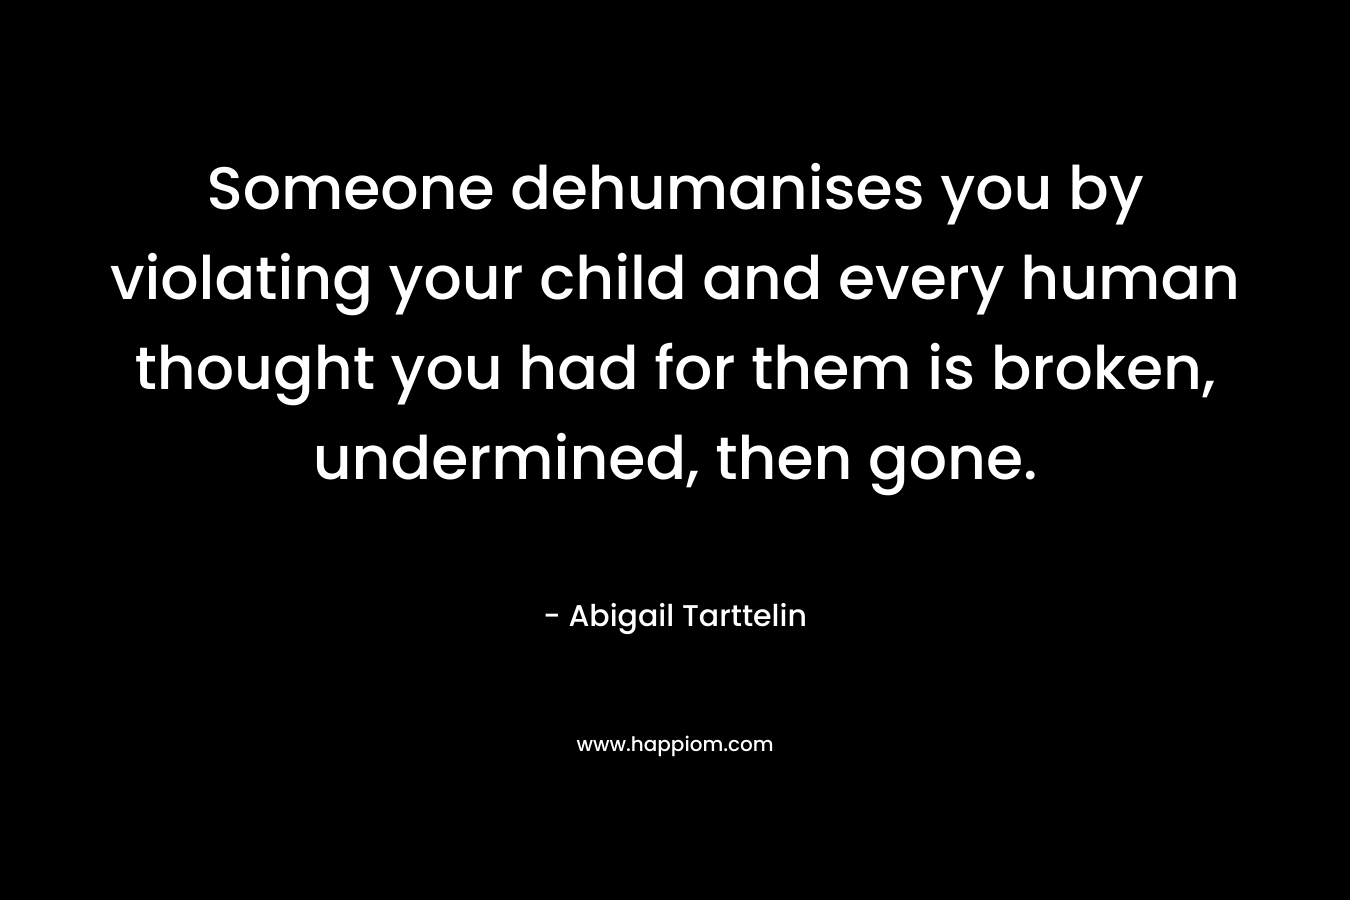 Someone dehumanises you by violating your child and every human thought you had for them is broken, undermined, then gone.